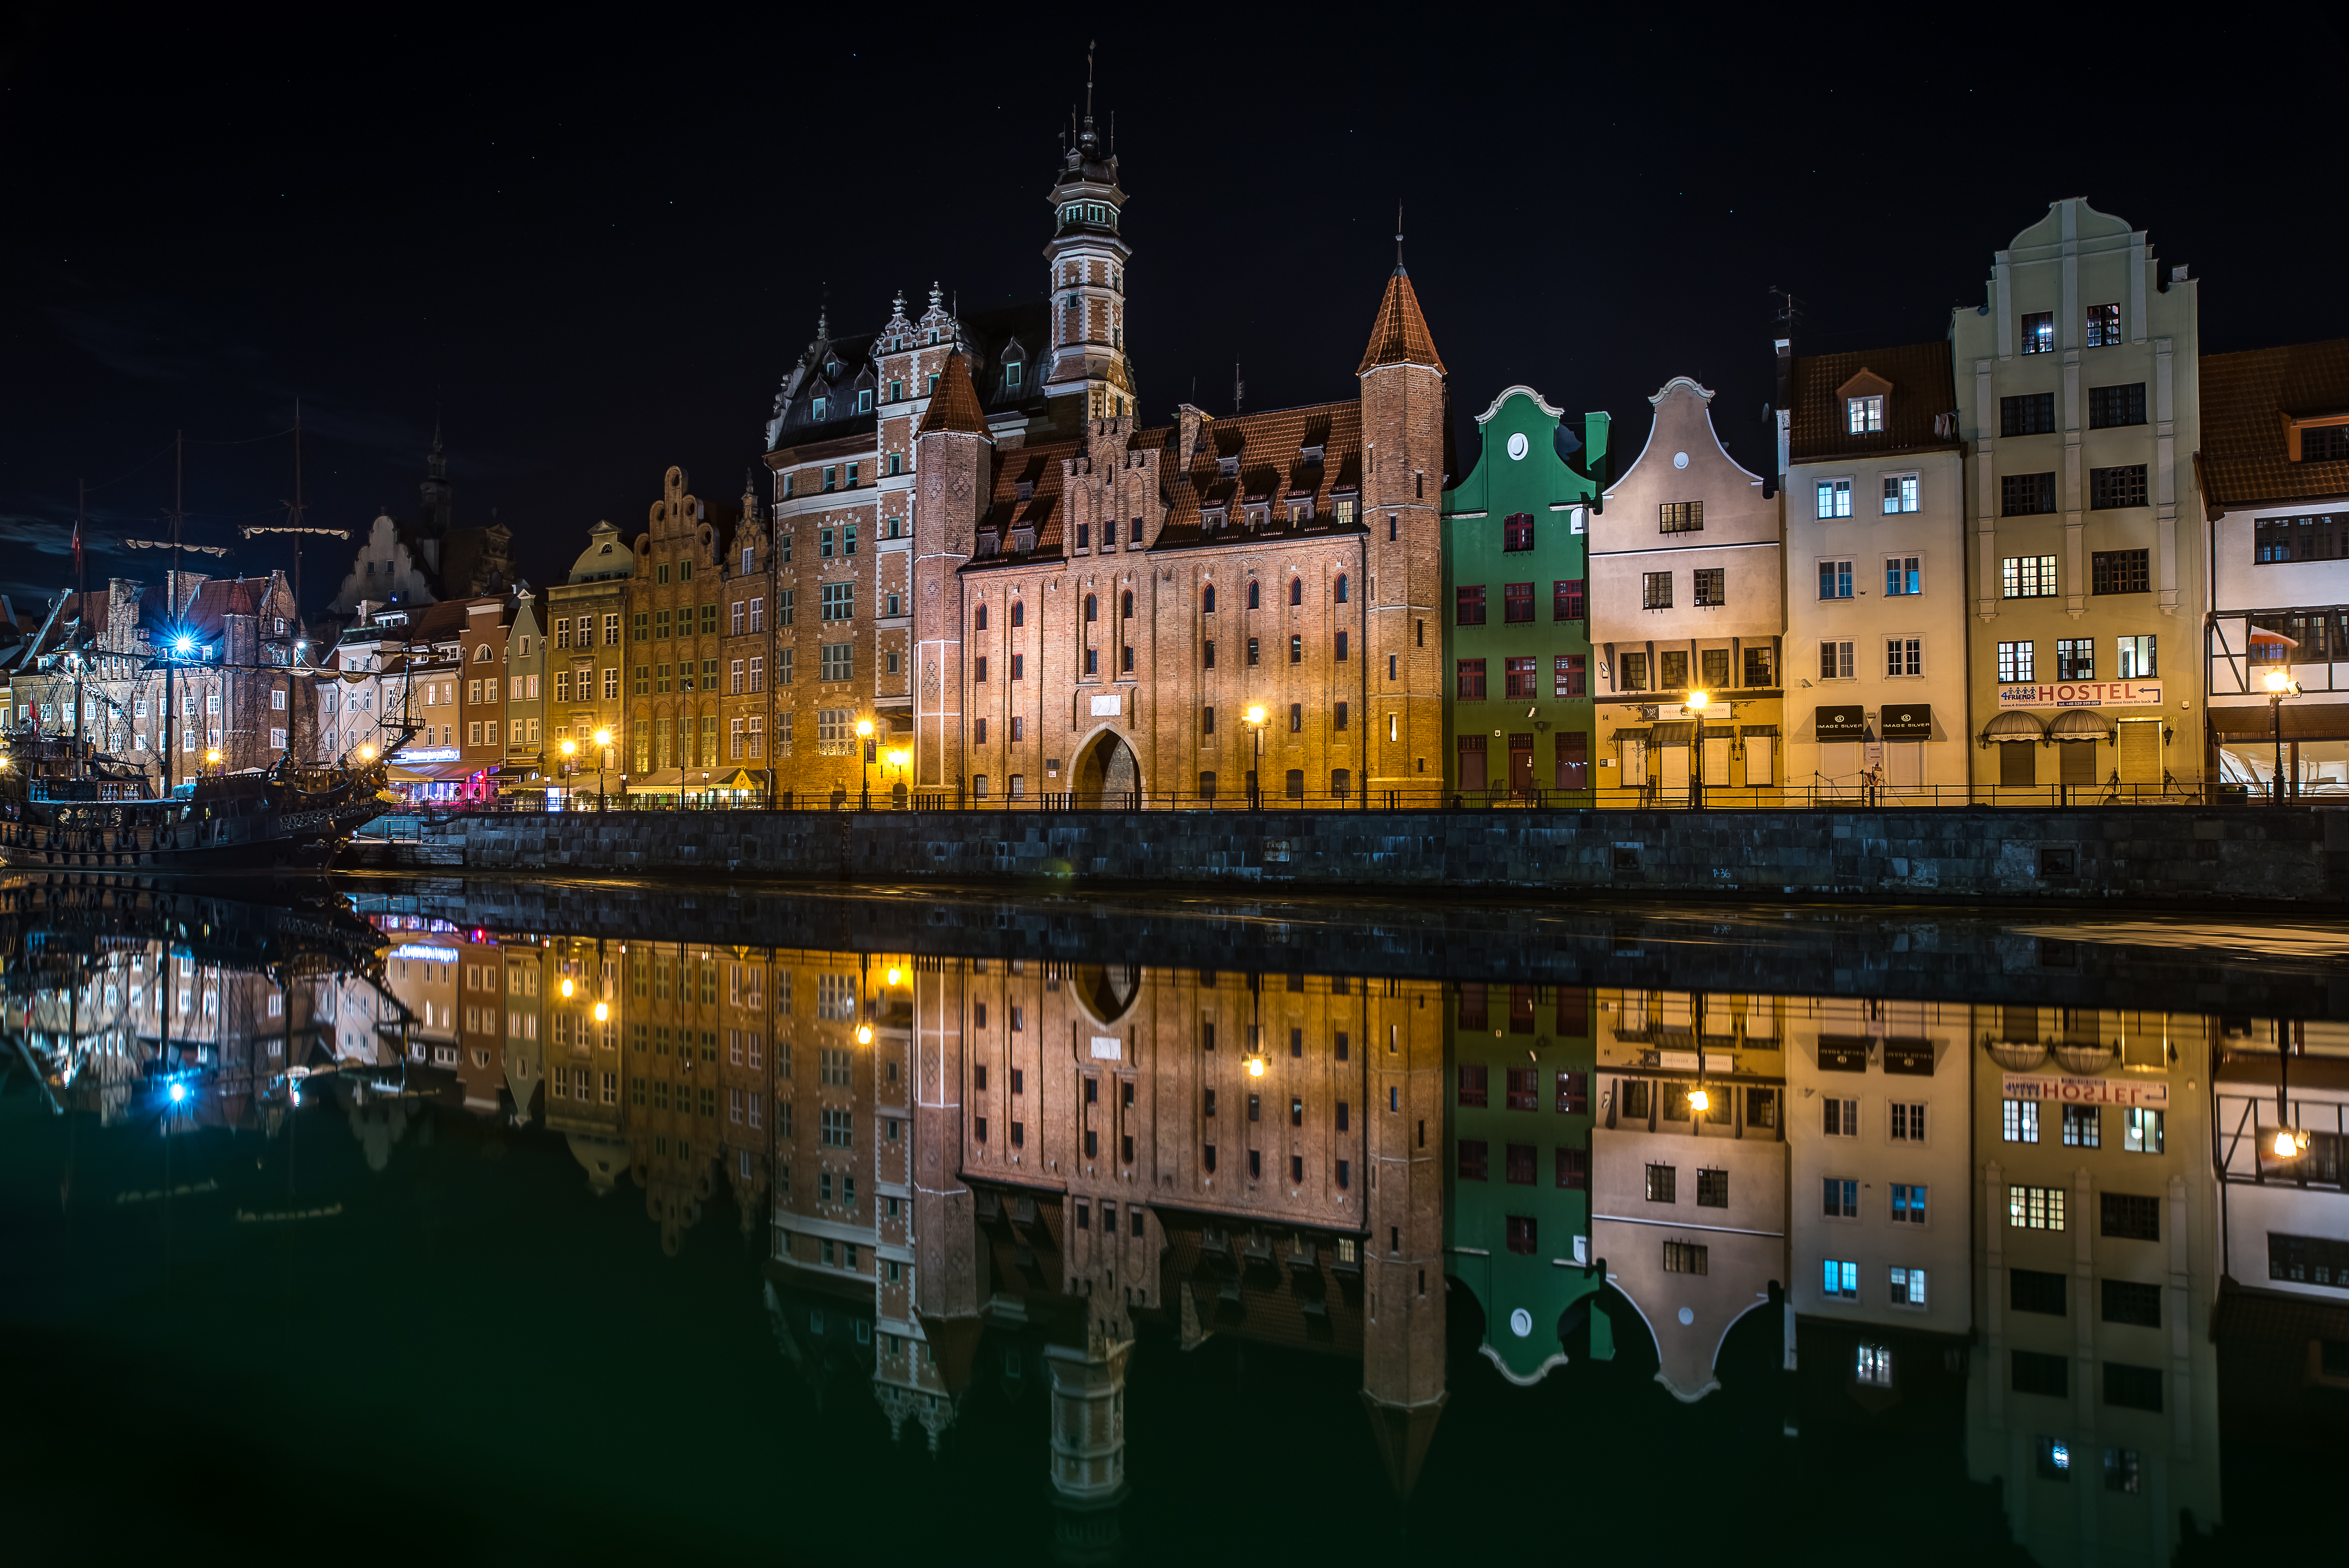 poland, man made, gdansk, light, night, reflection, river, town, towns